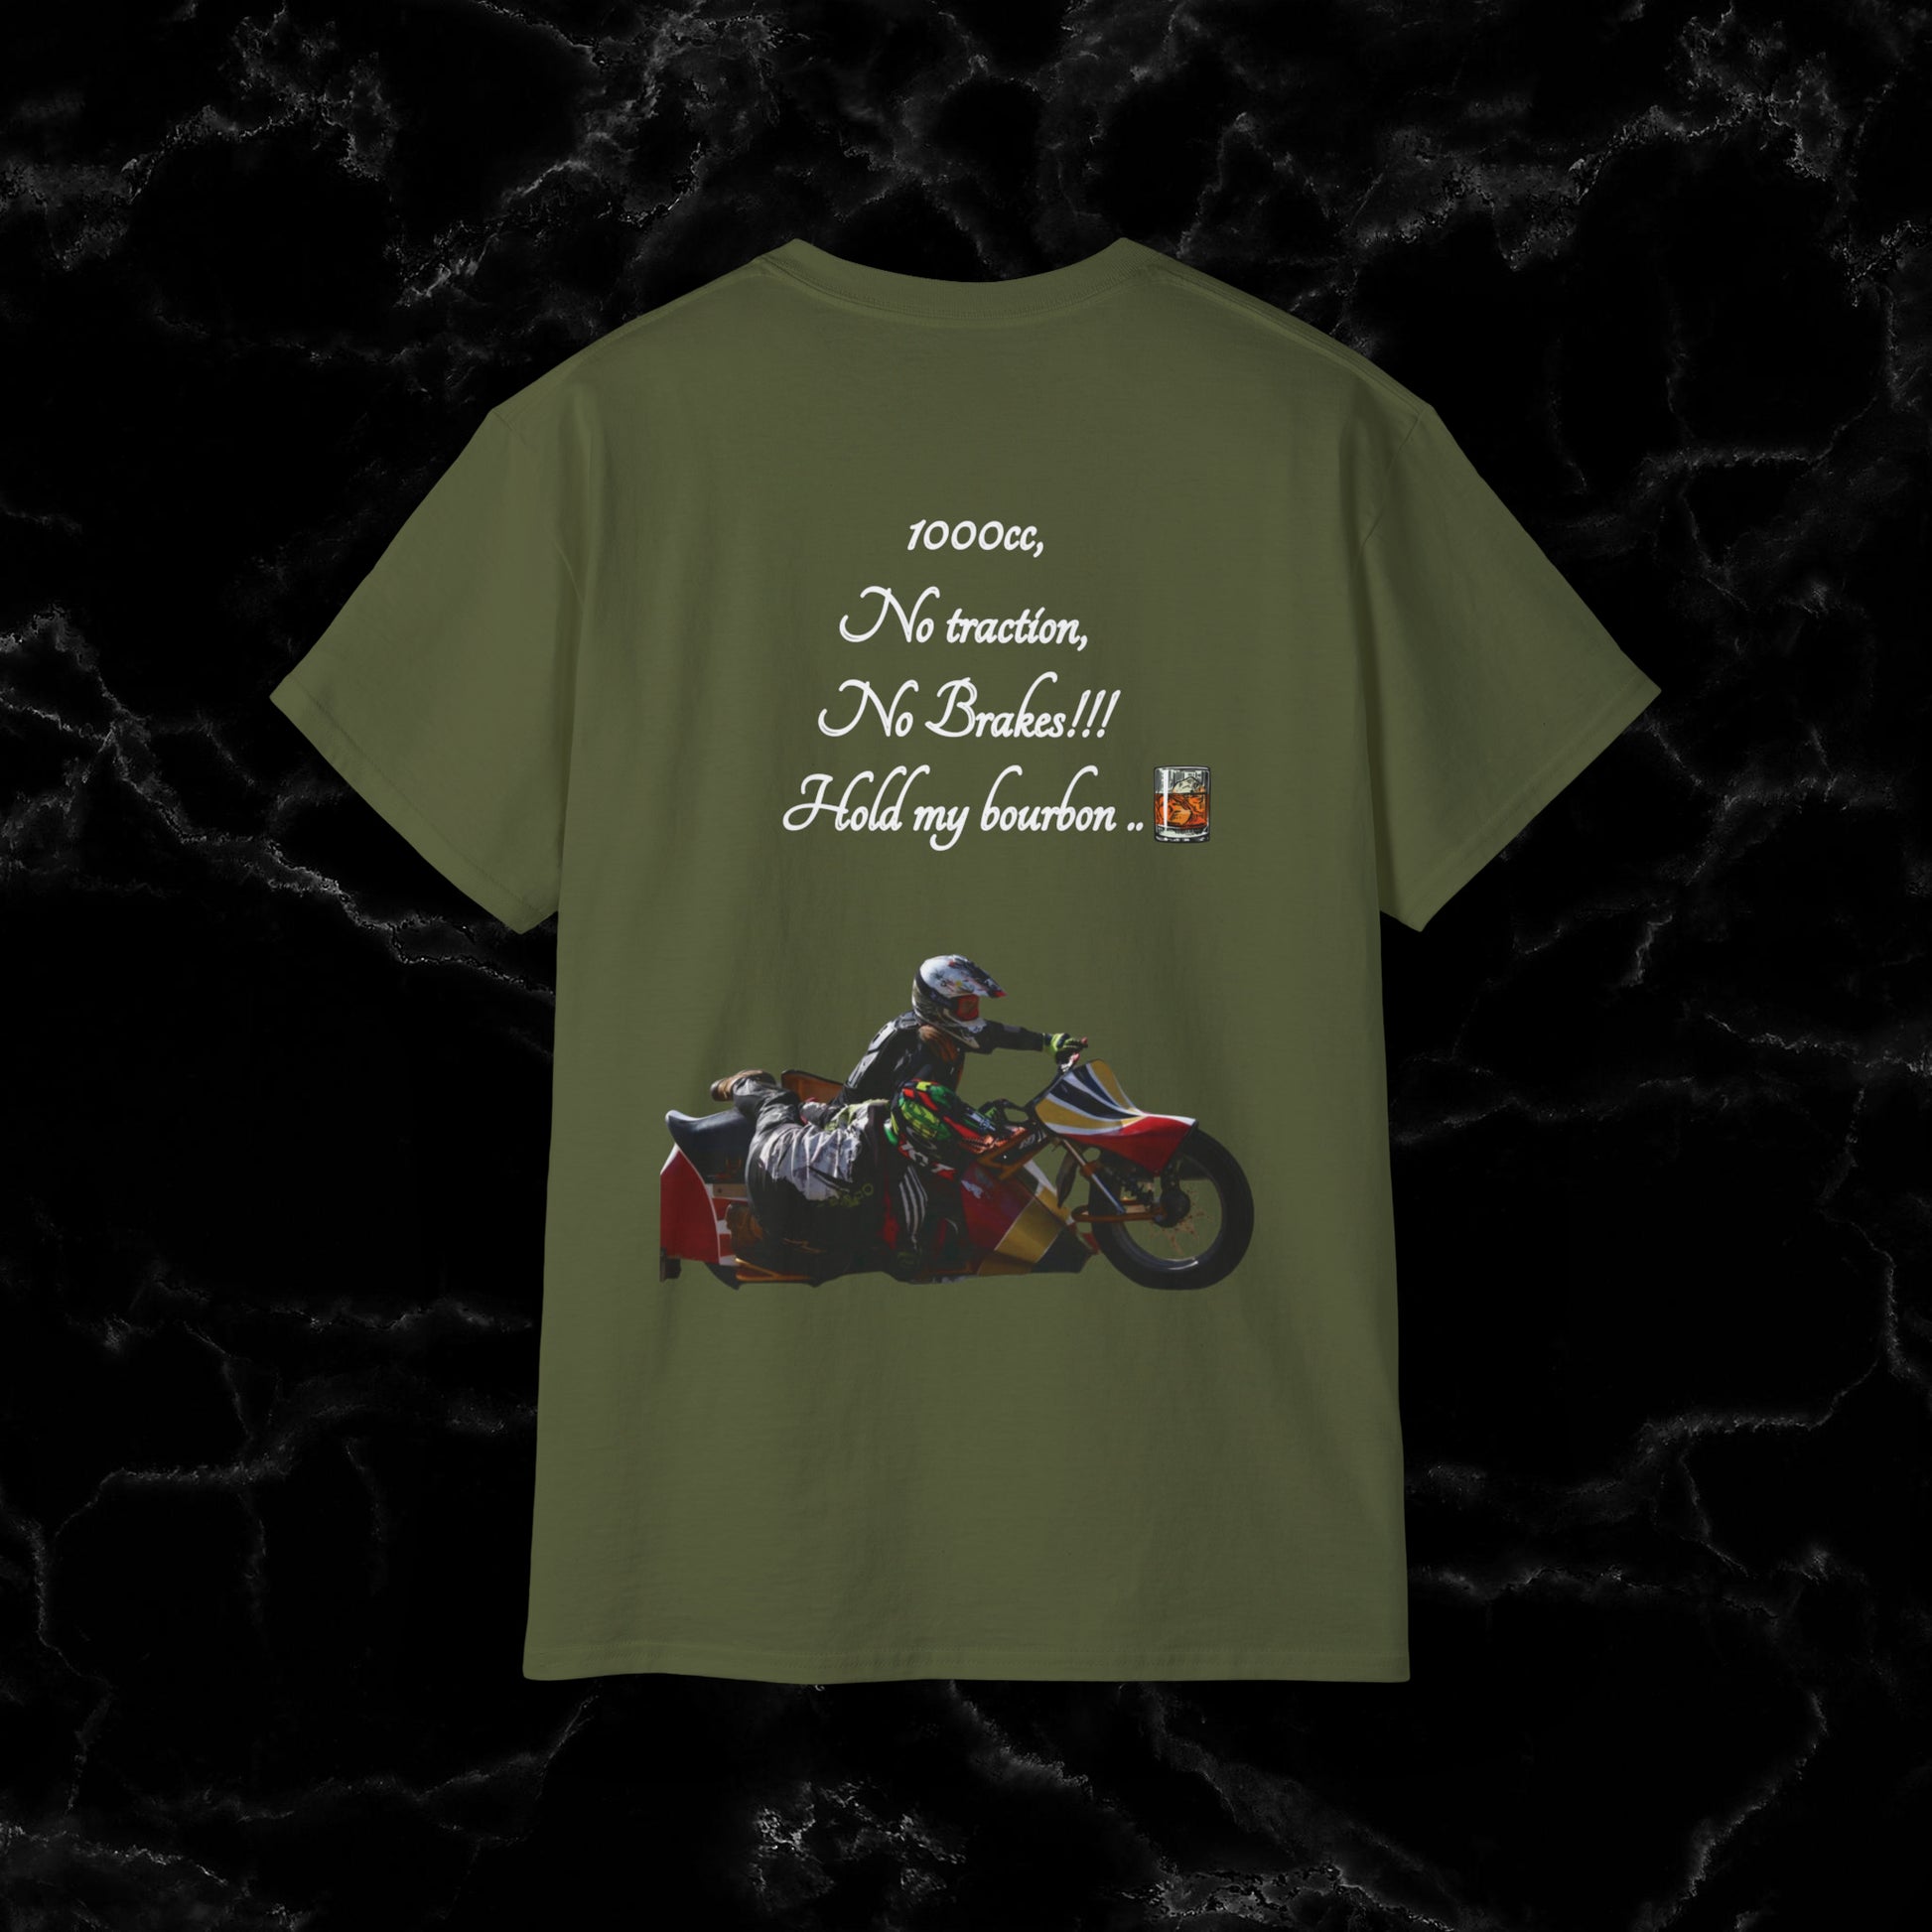 Sidecar, Motorcycle Sidecar, 1000cc - No Traction, No Brakes, Hold My Bourbon | Unisex Sidecar Tee with Front and Back Design T-Shirt   